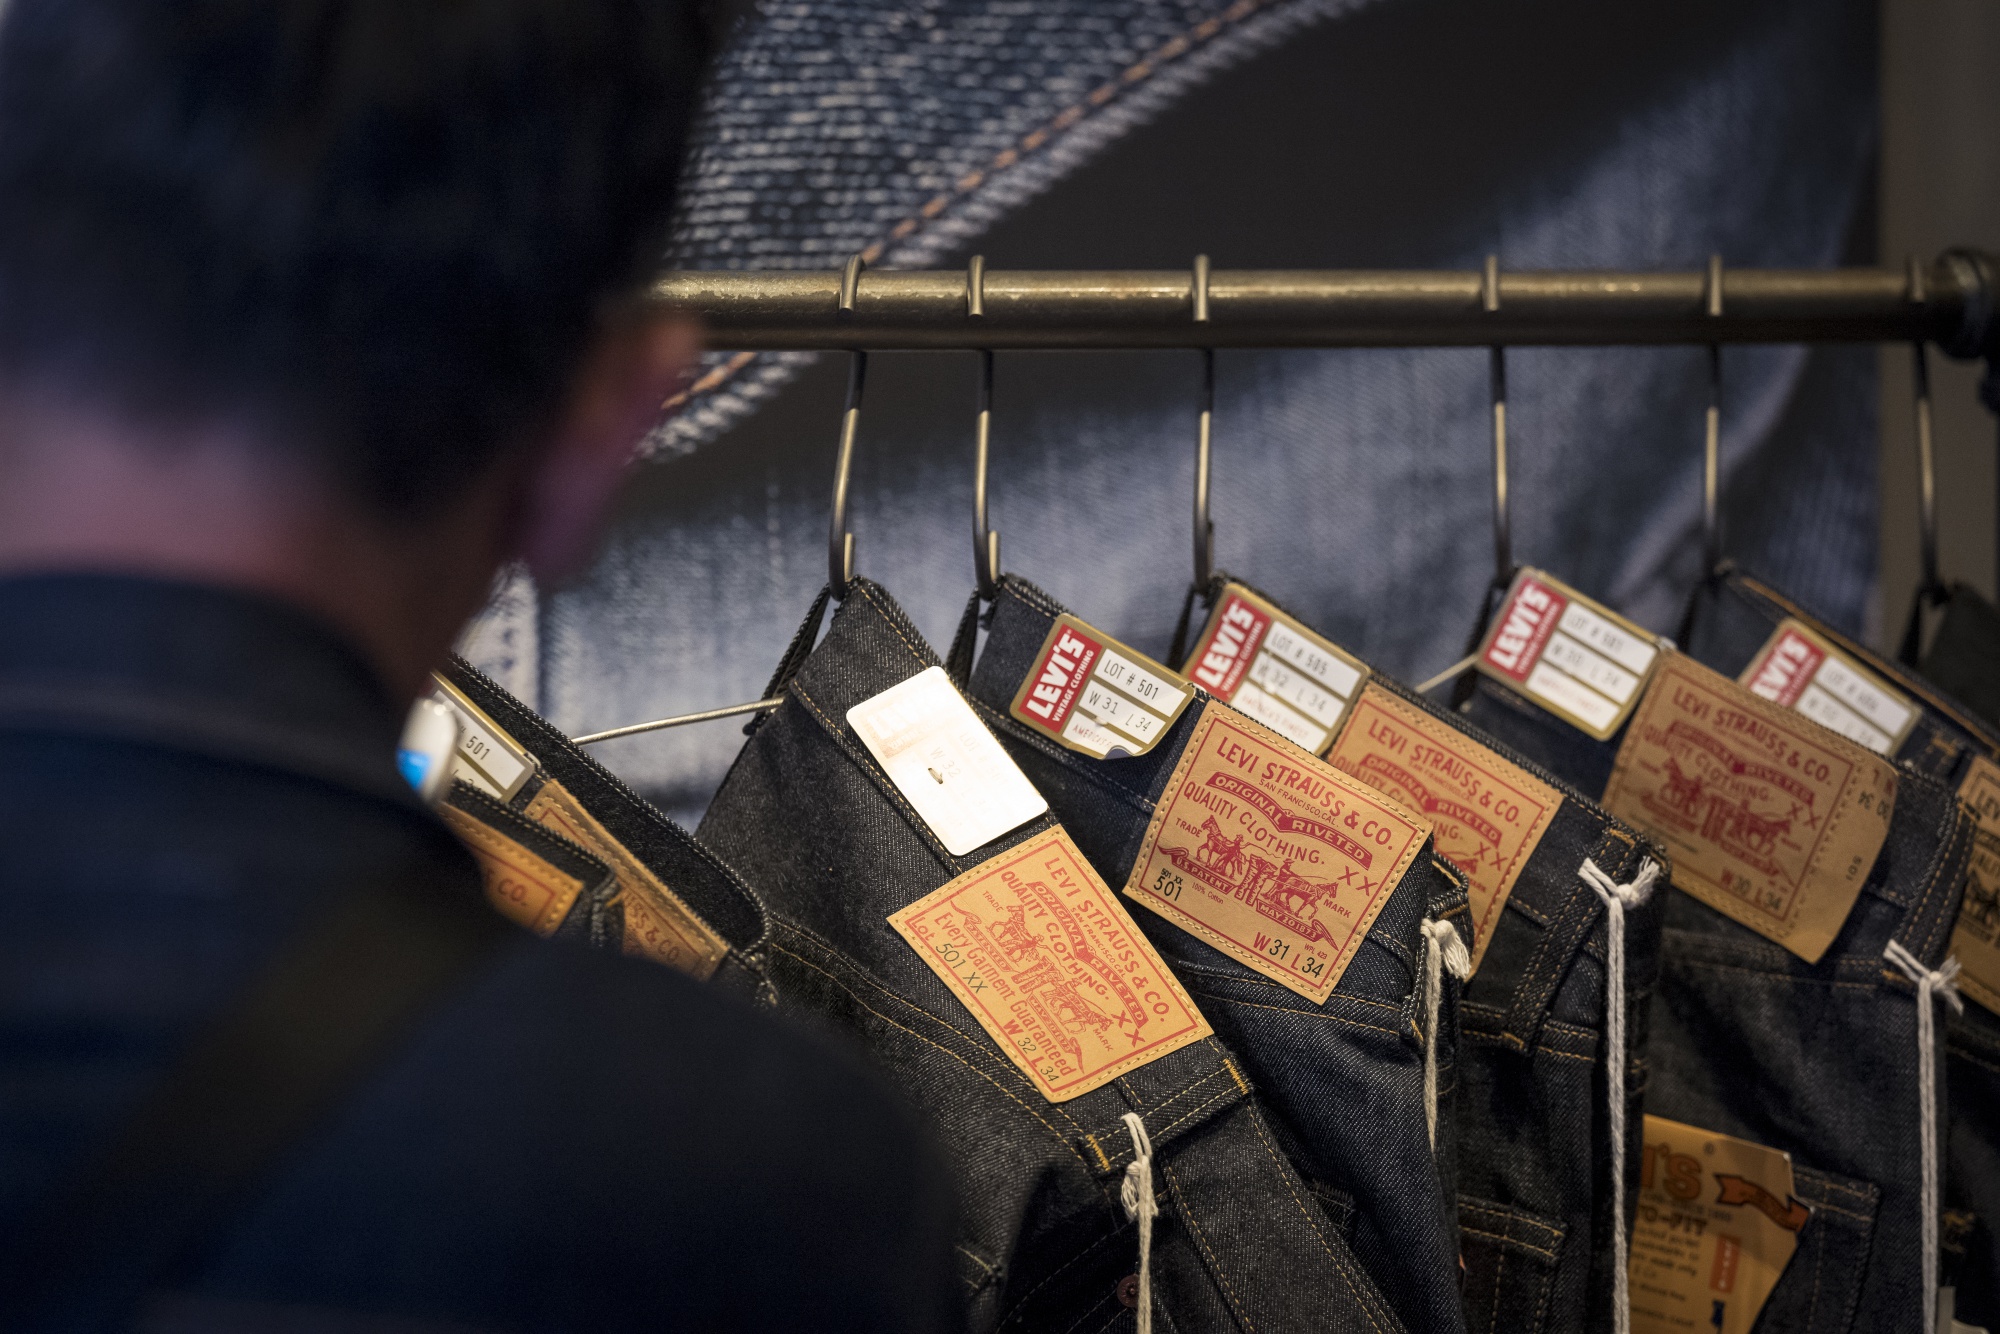 Levi's CEO Says Baggy Jeans Are Making a Comeback Amid Pandemic